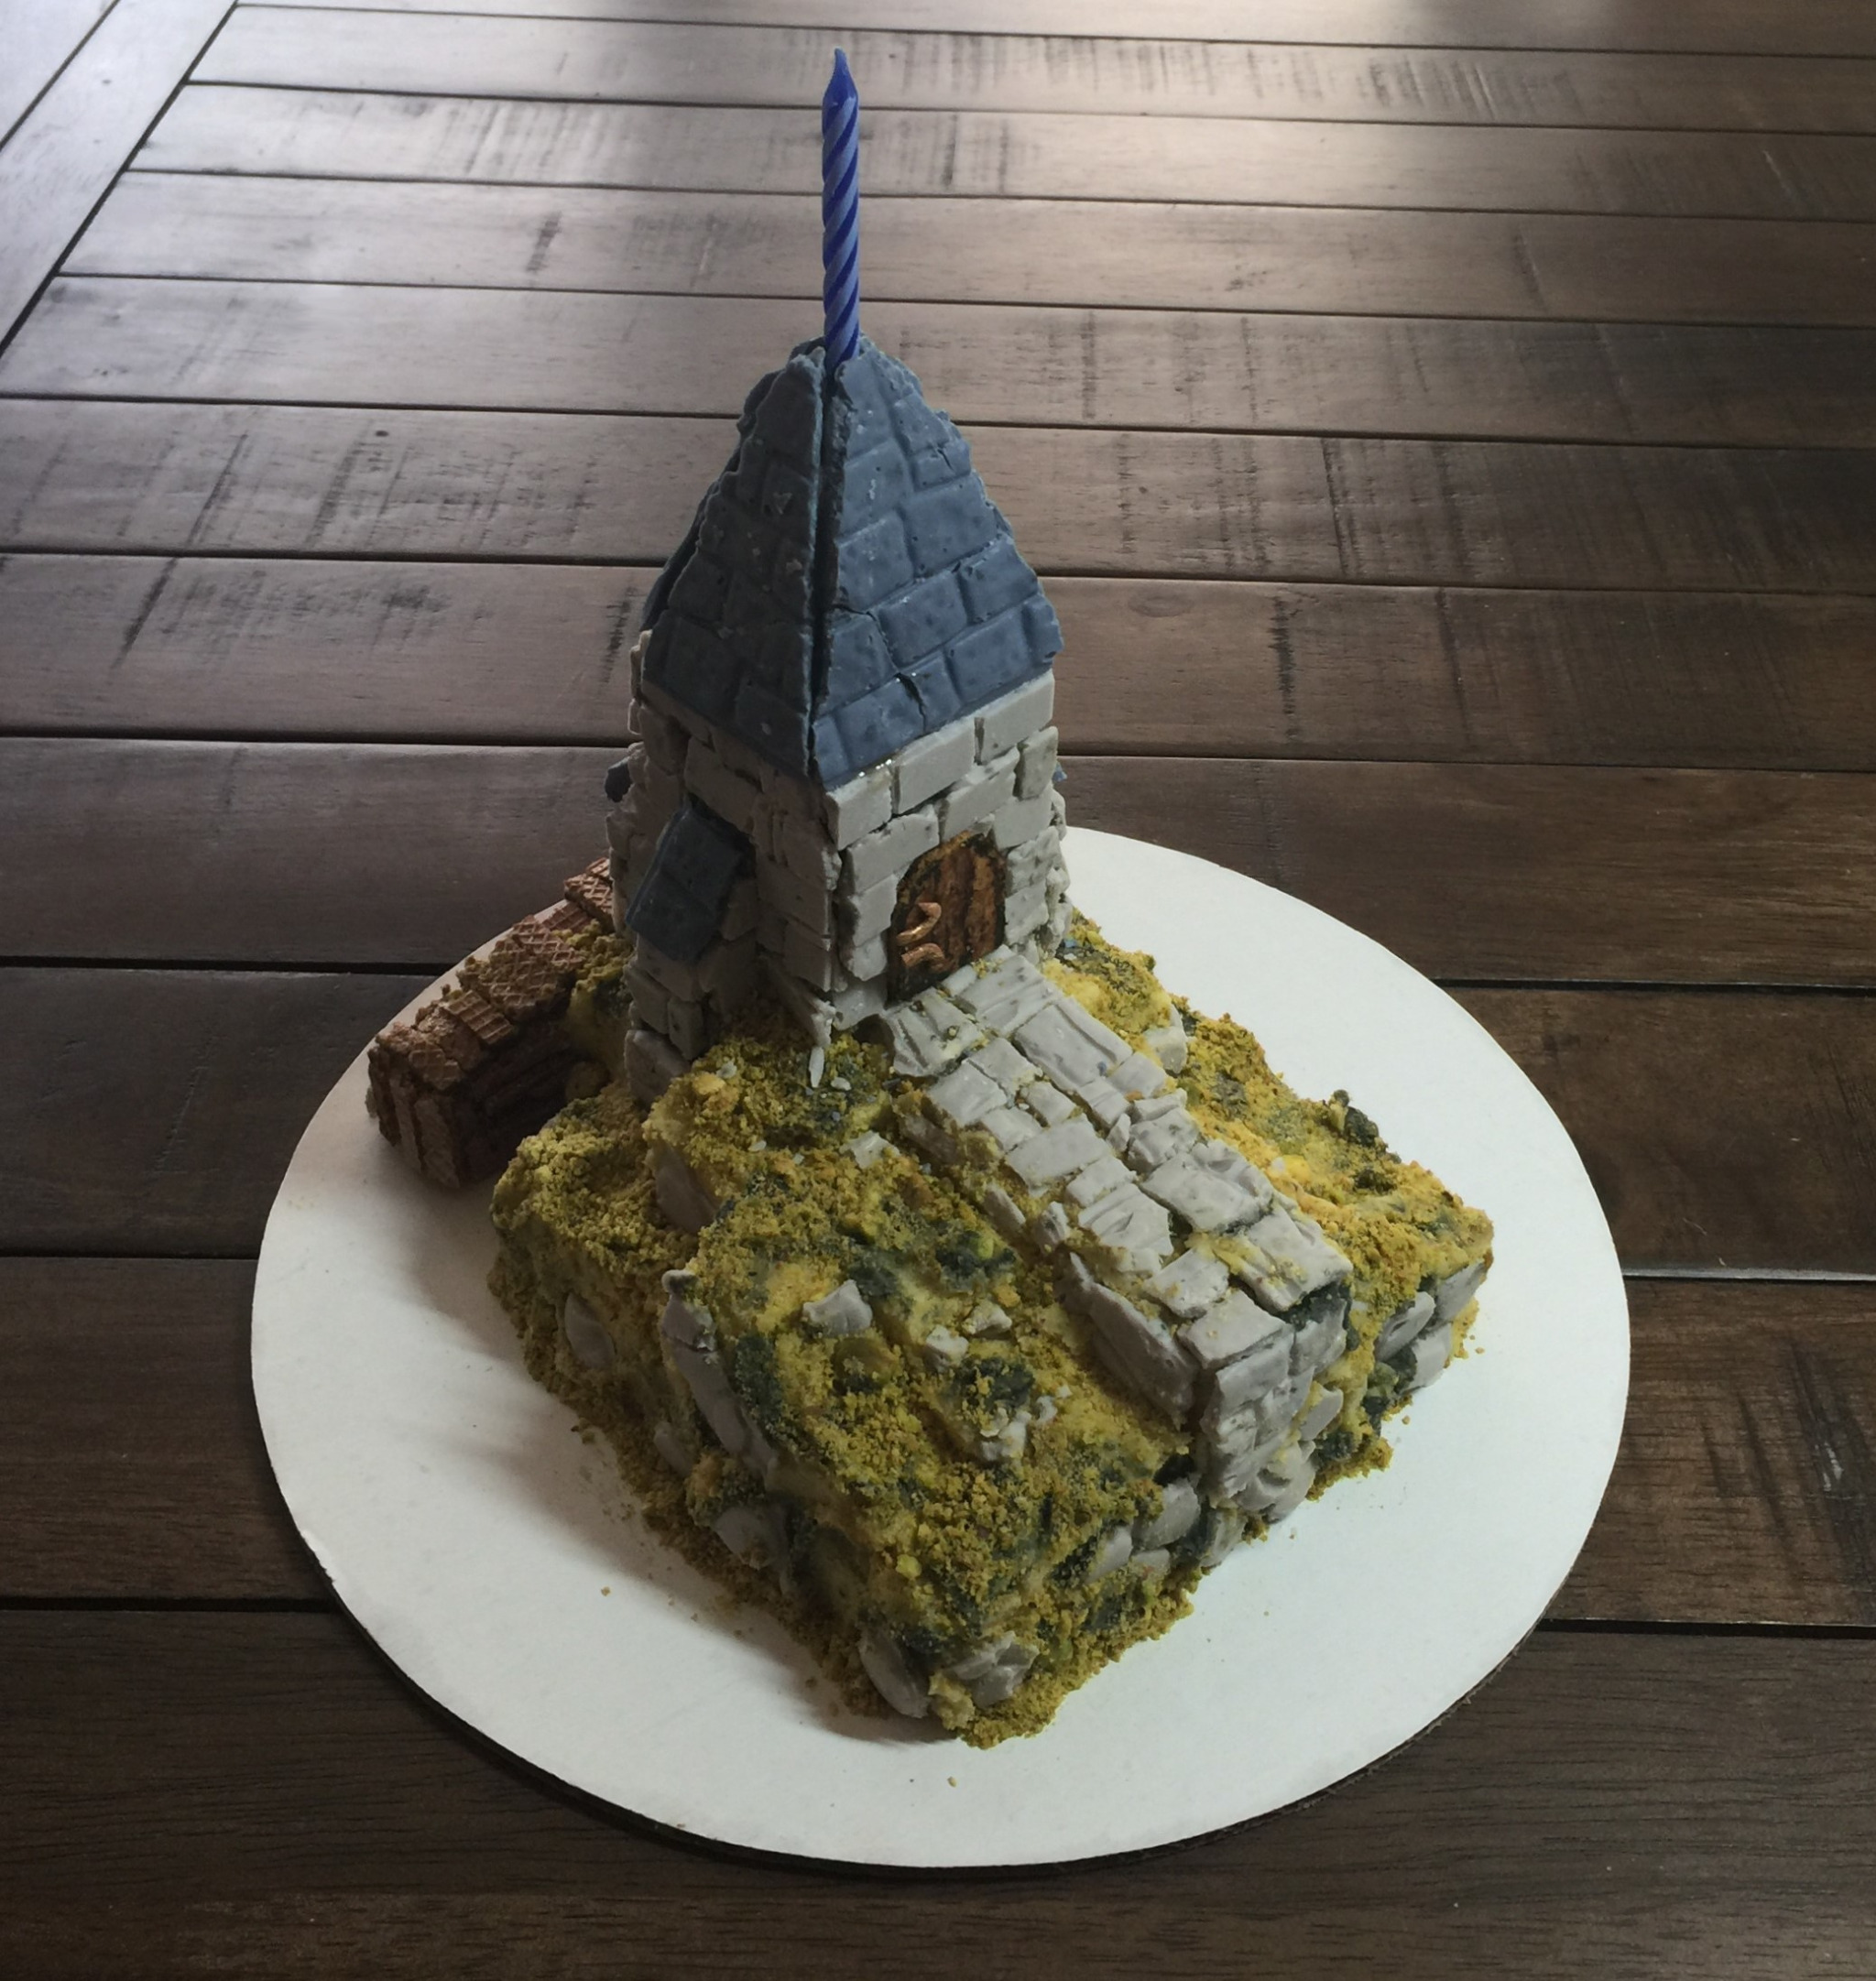 A cake in the shape of Orbonne Abbey